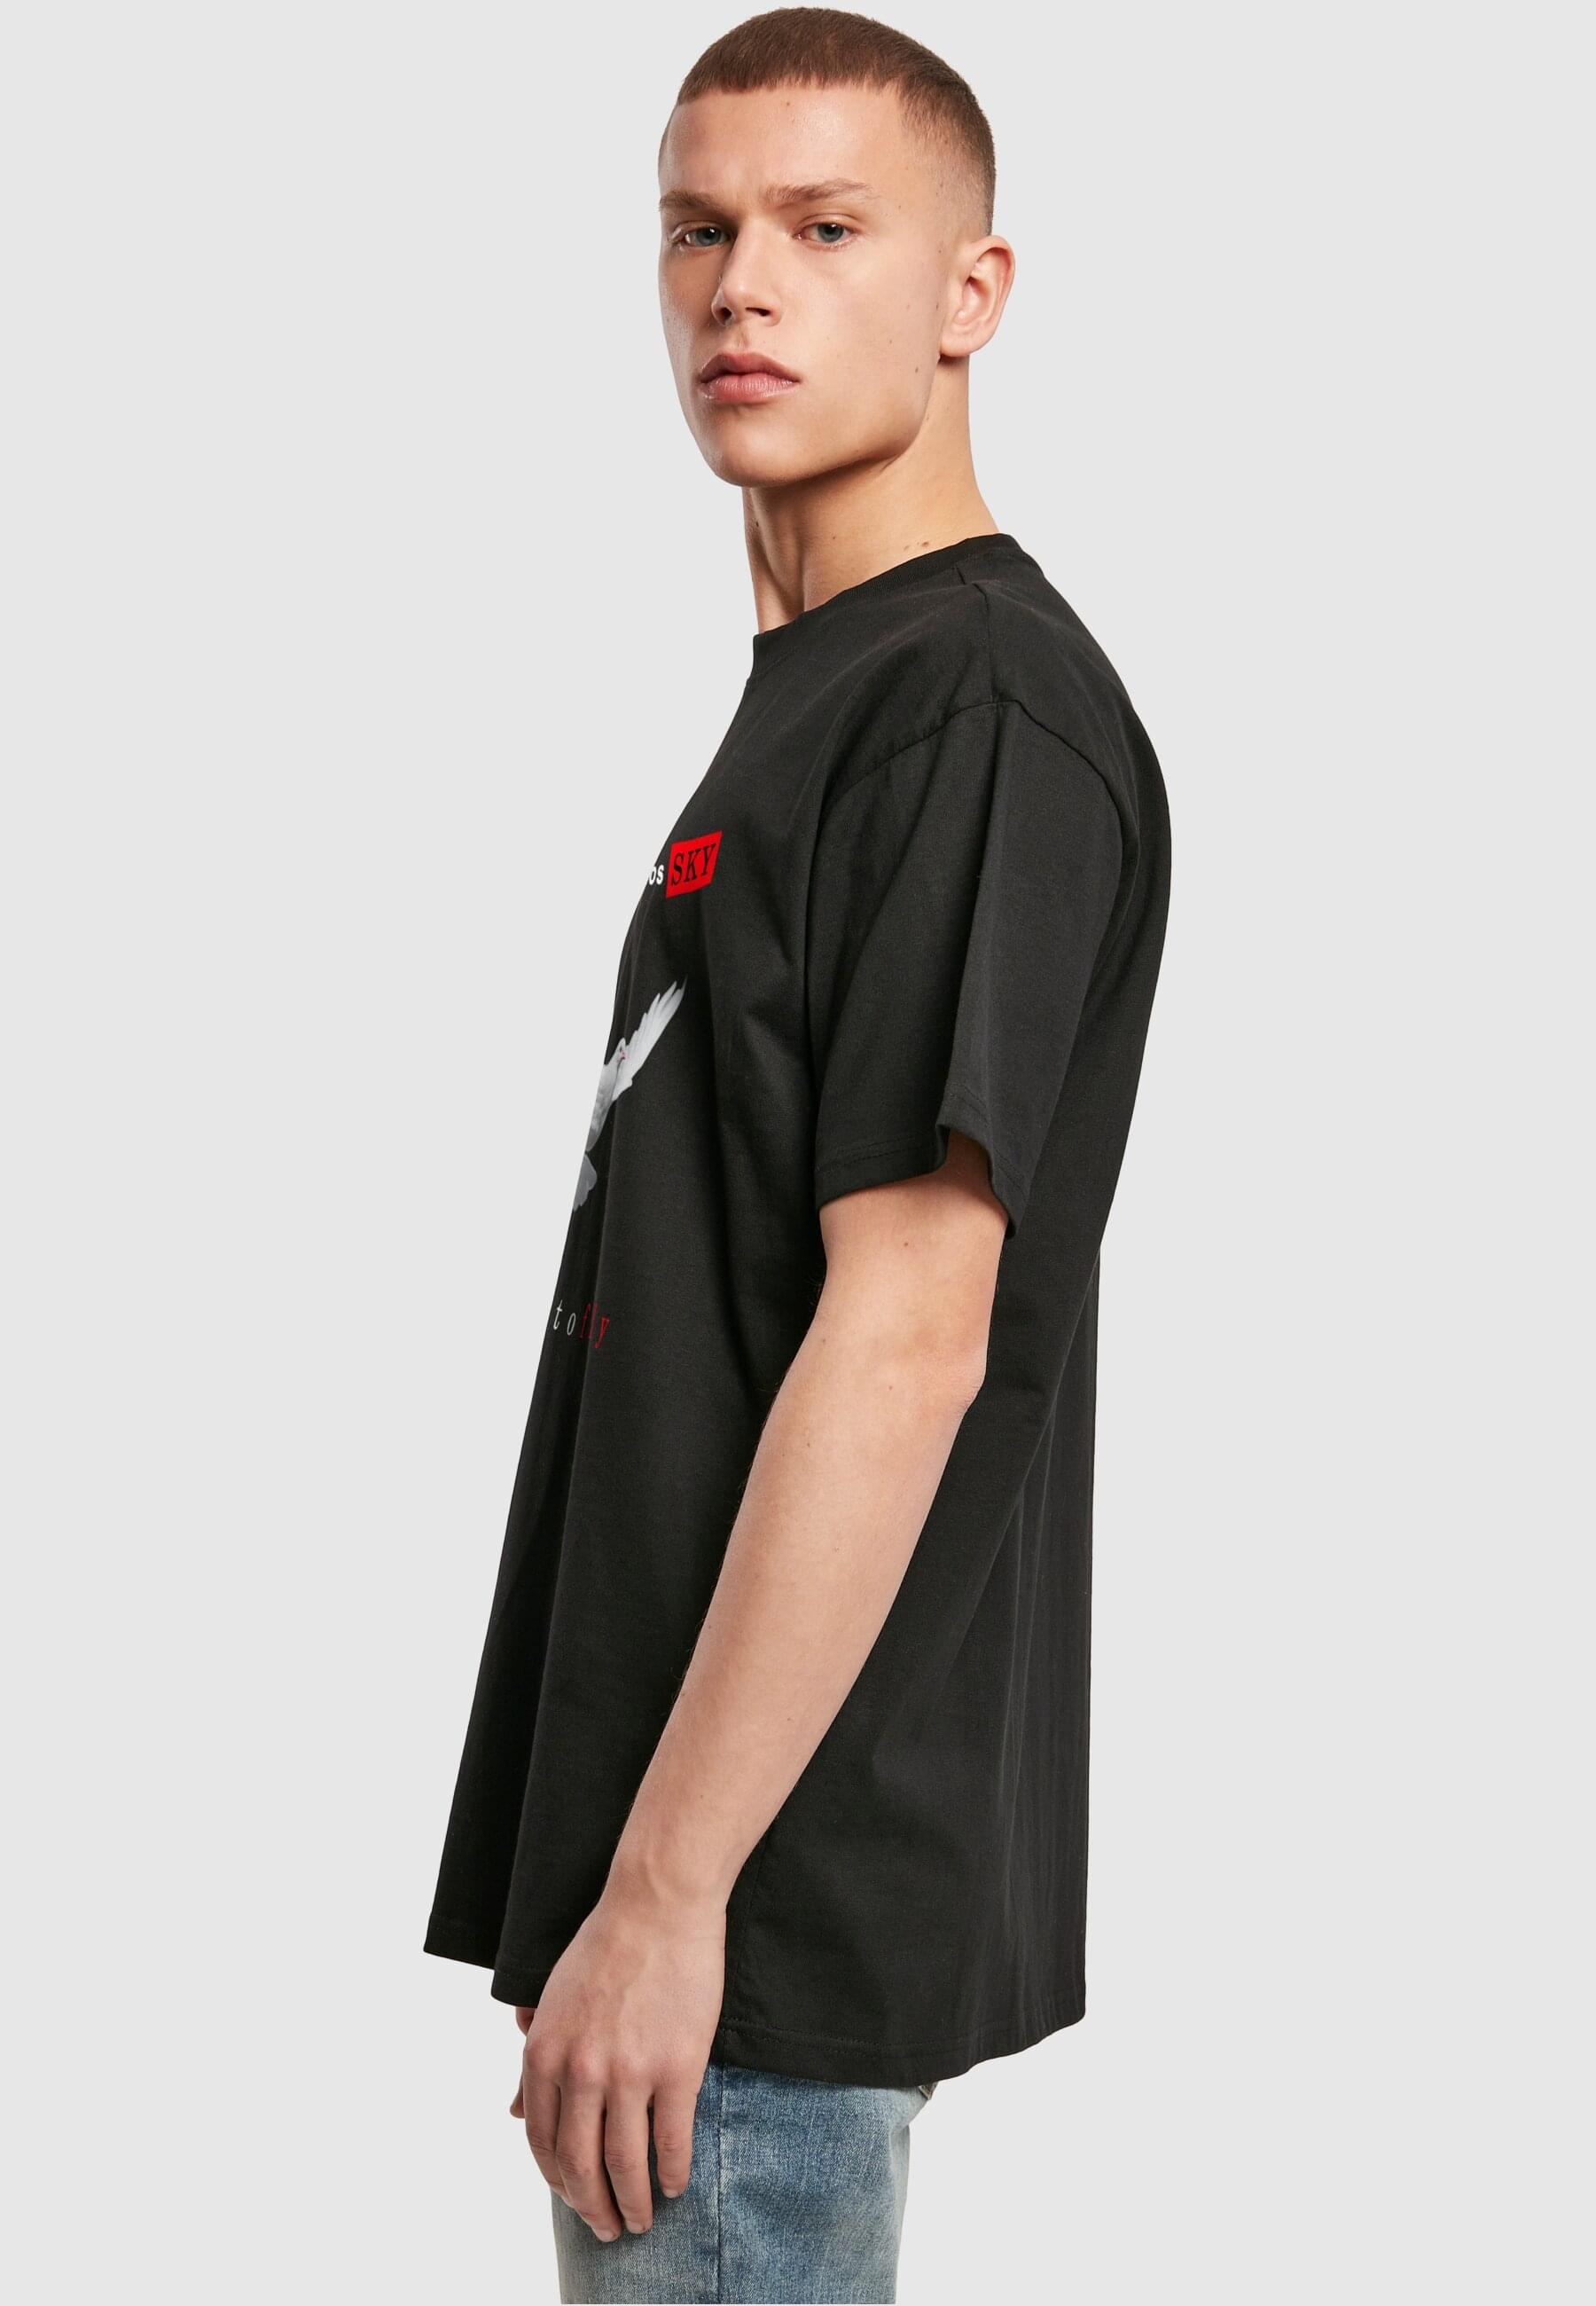 Upscale by Mister Tee«, T-Shirt to »Unisex Ready kaufen Oversize Tee (1 | ▷ fly tlg.) BAUR